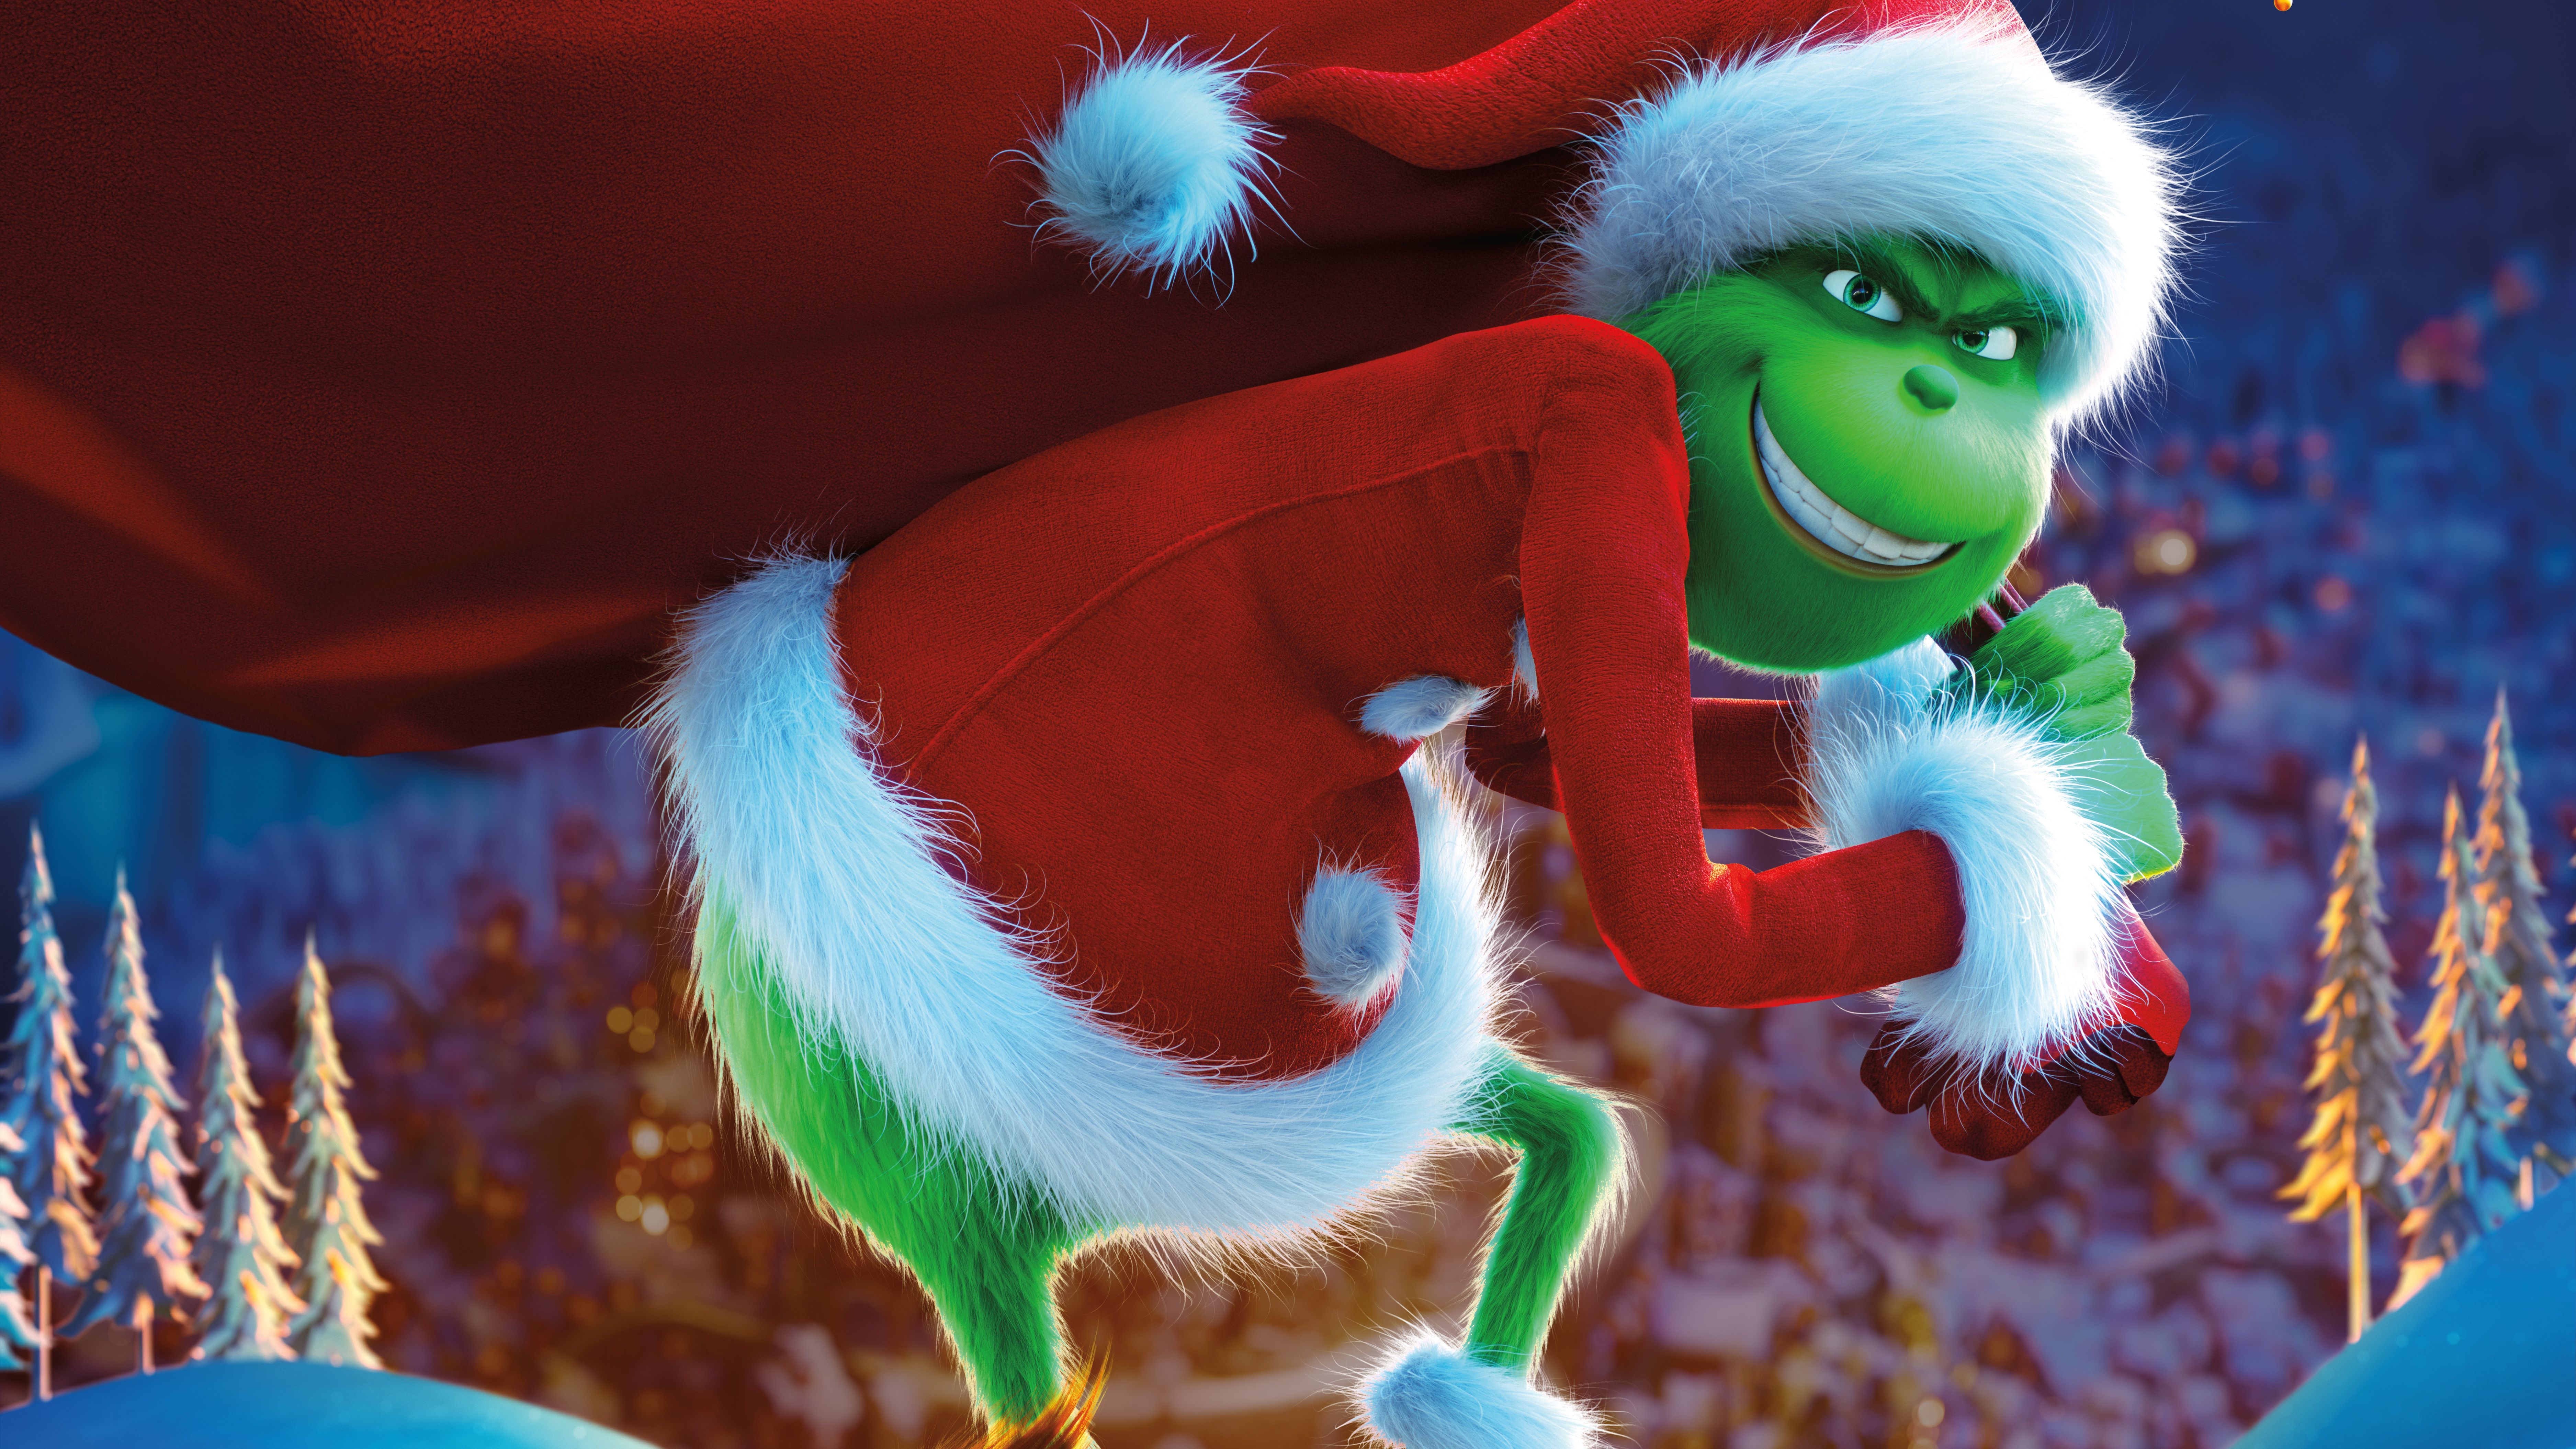 The Grinch 2018 Wallpaper Free The Grinch 2018 Background